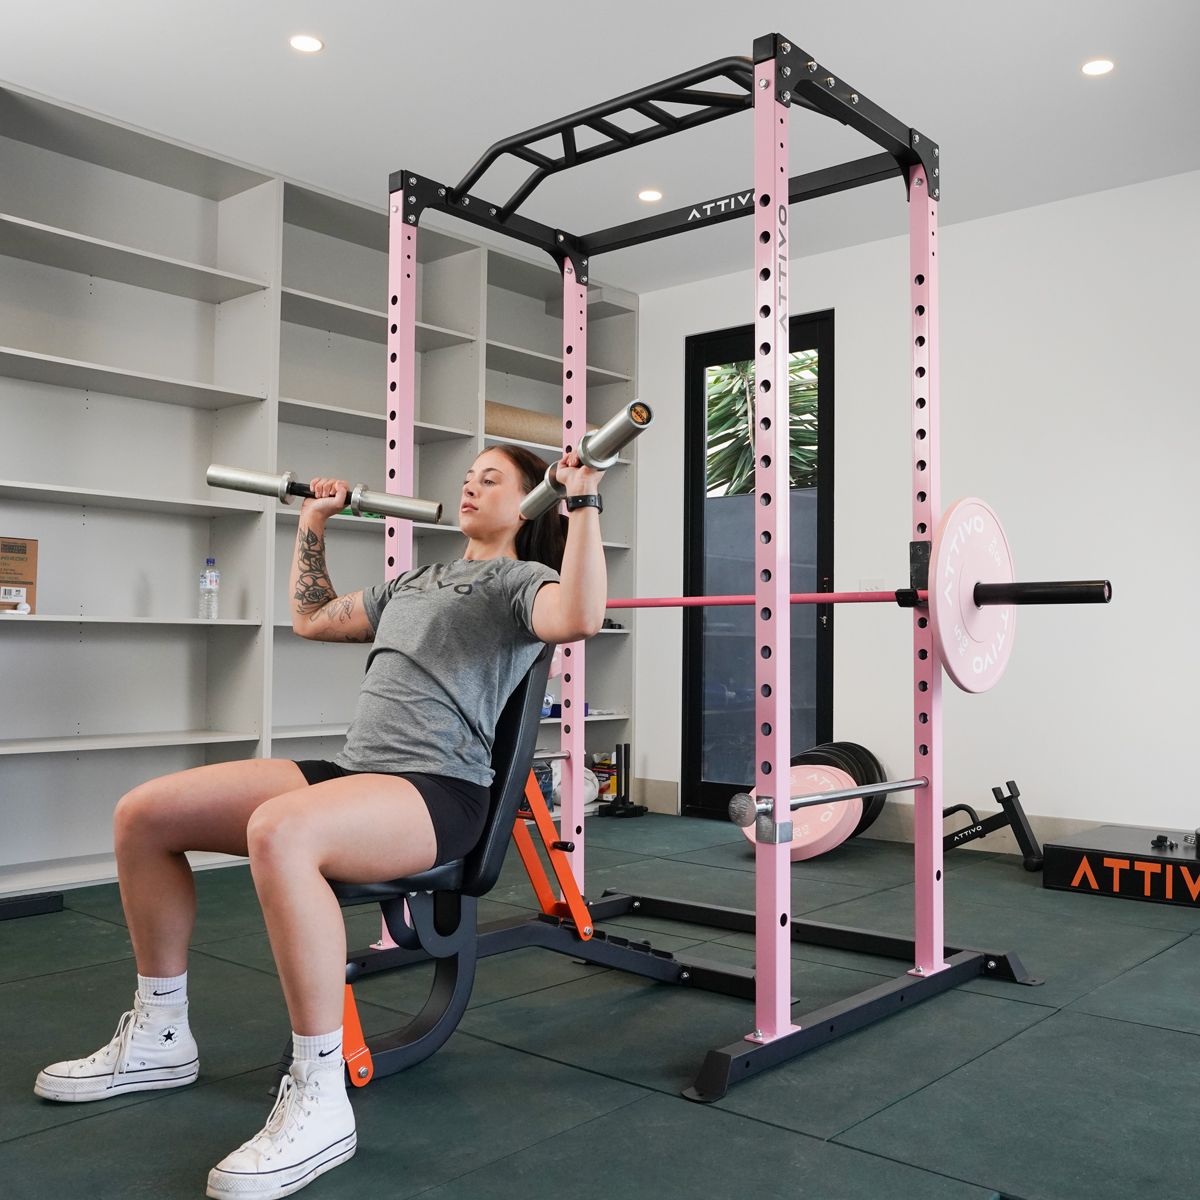 ATTIVO Pink Power Rack Multi-Function Adjustable Power Cage with J-Hooks, Safety Spotter Arms ZY18